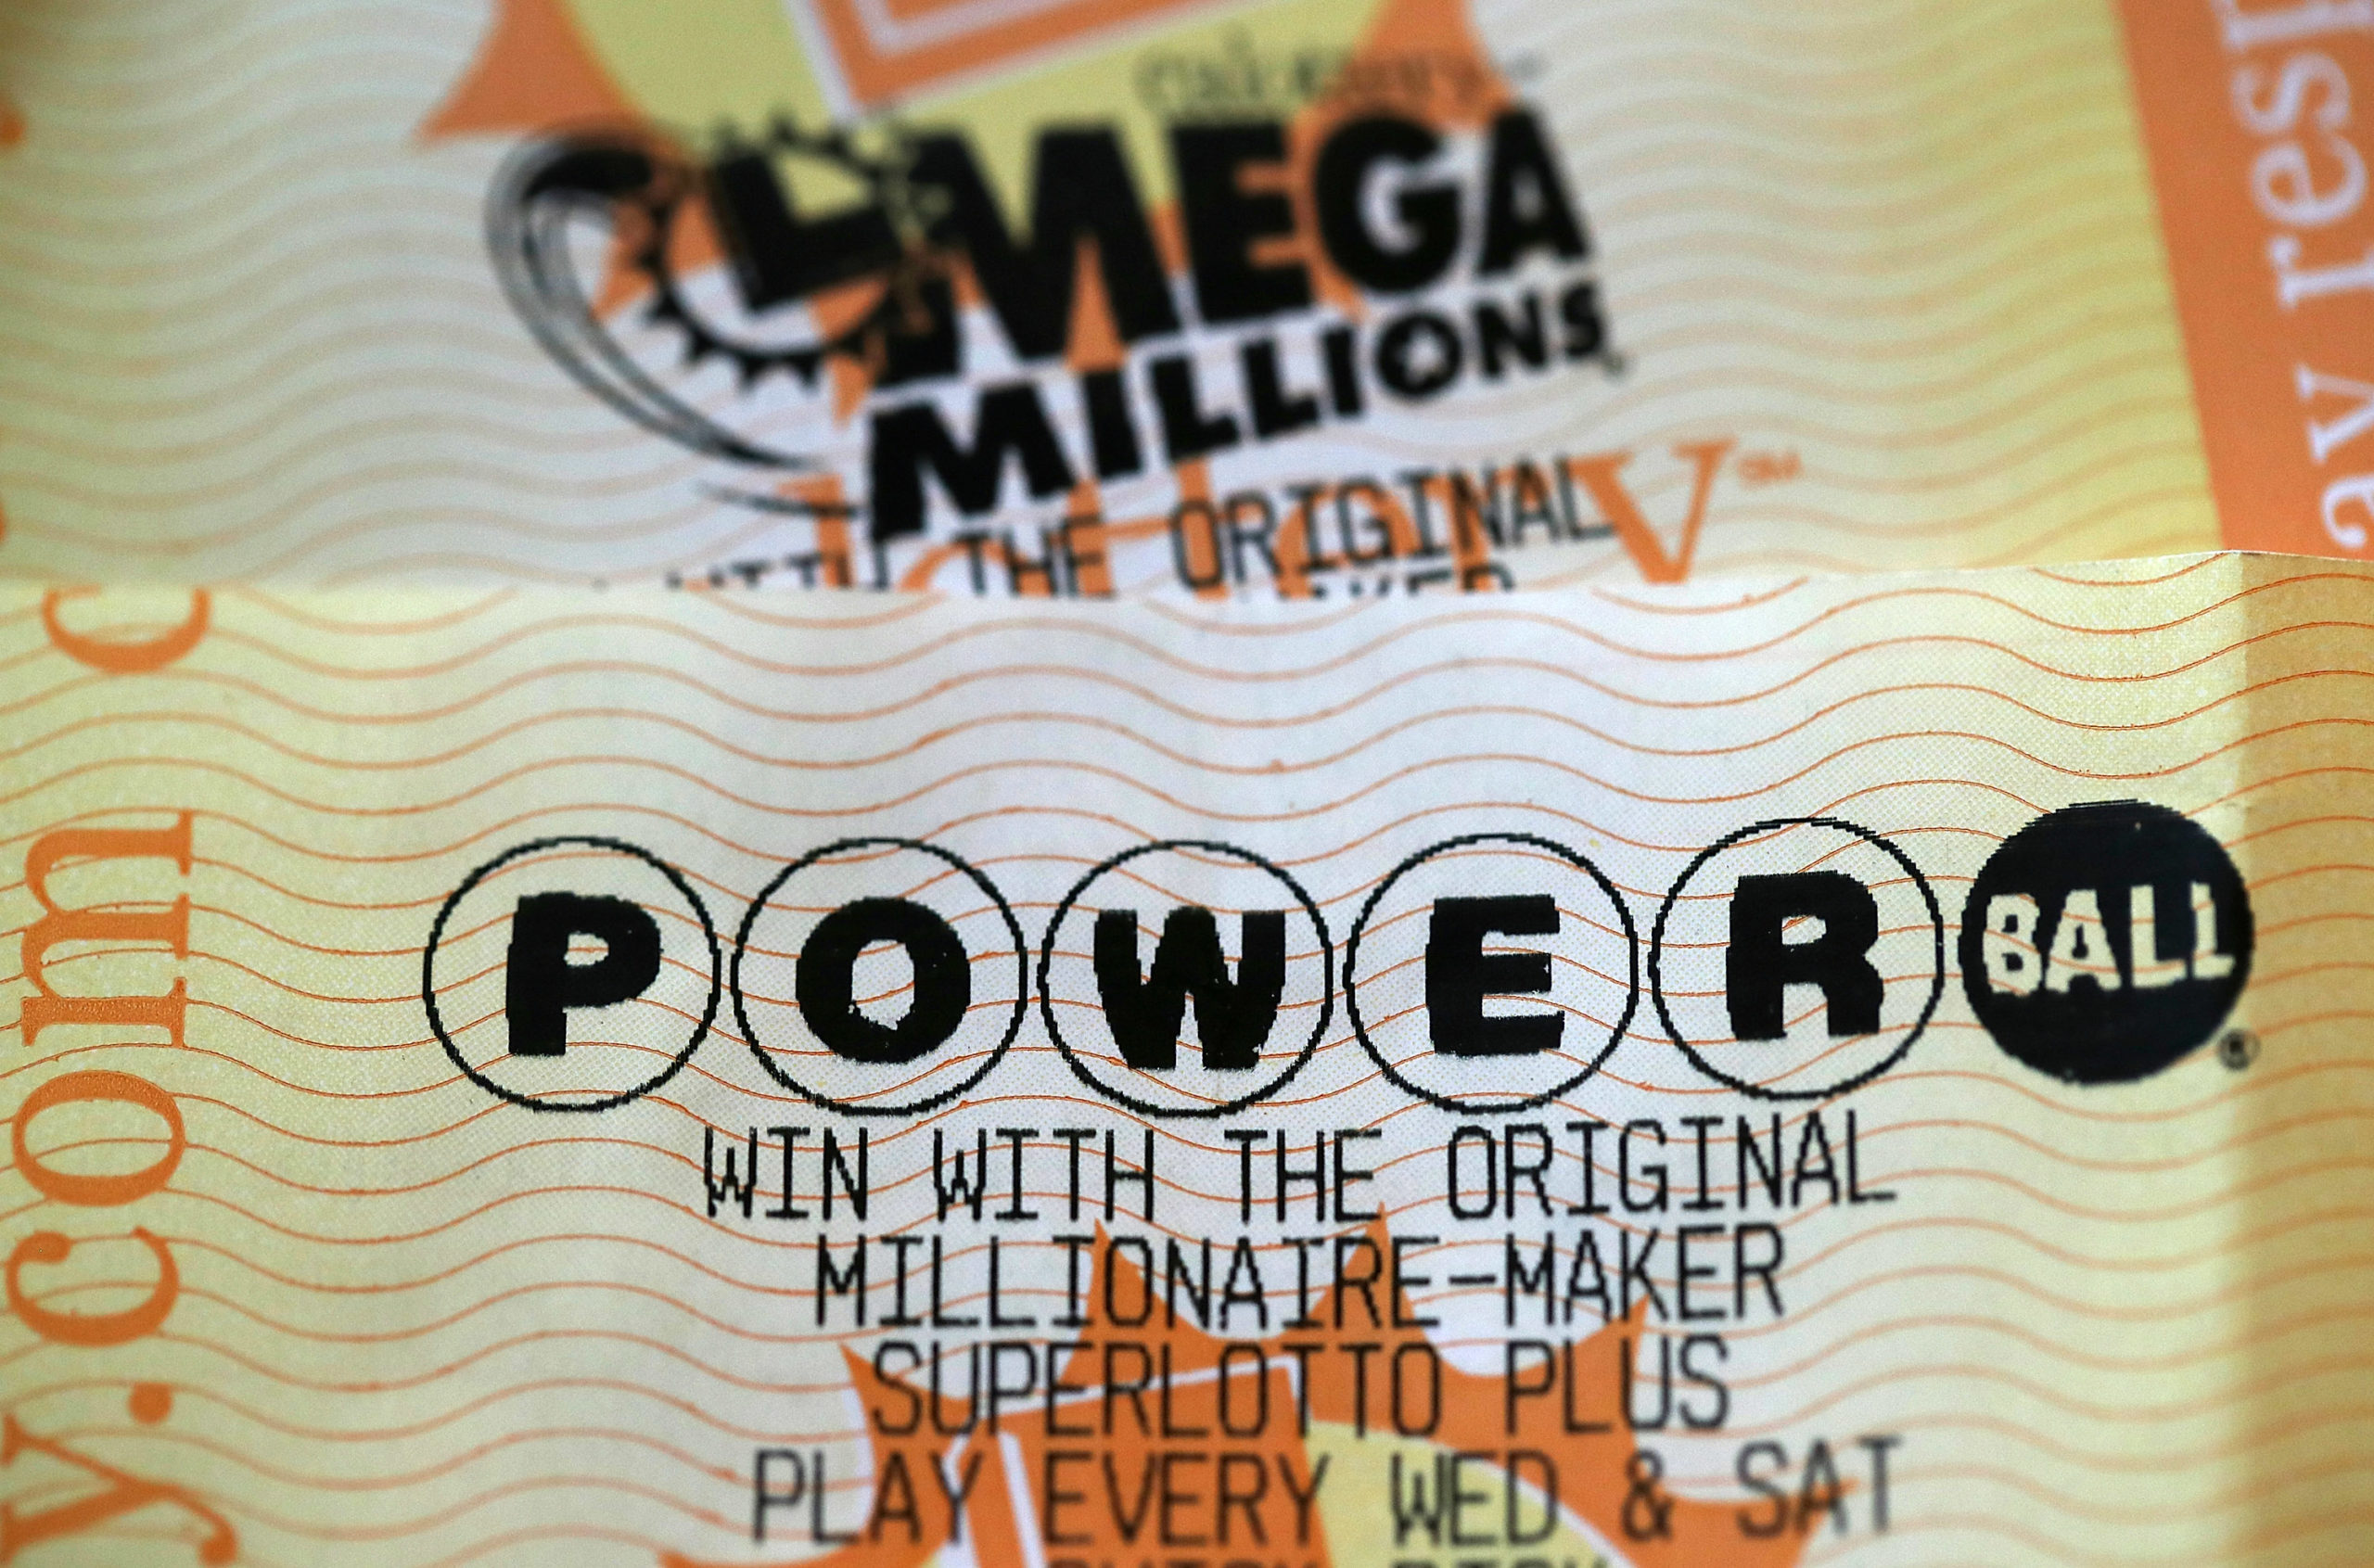 Mega Millions South Carolina Arsenal!  They published the winning numbers for the September 29 drawing